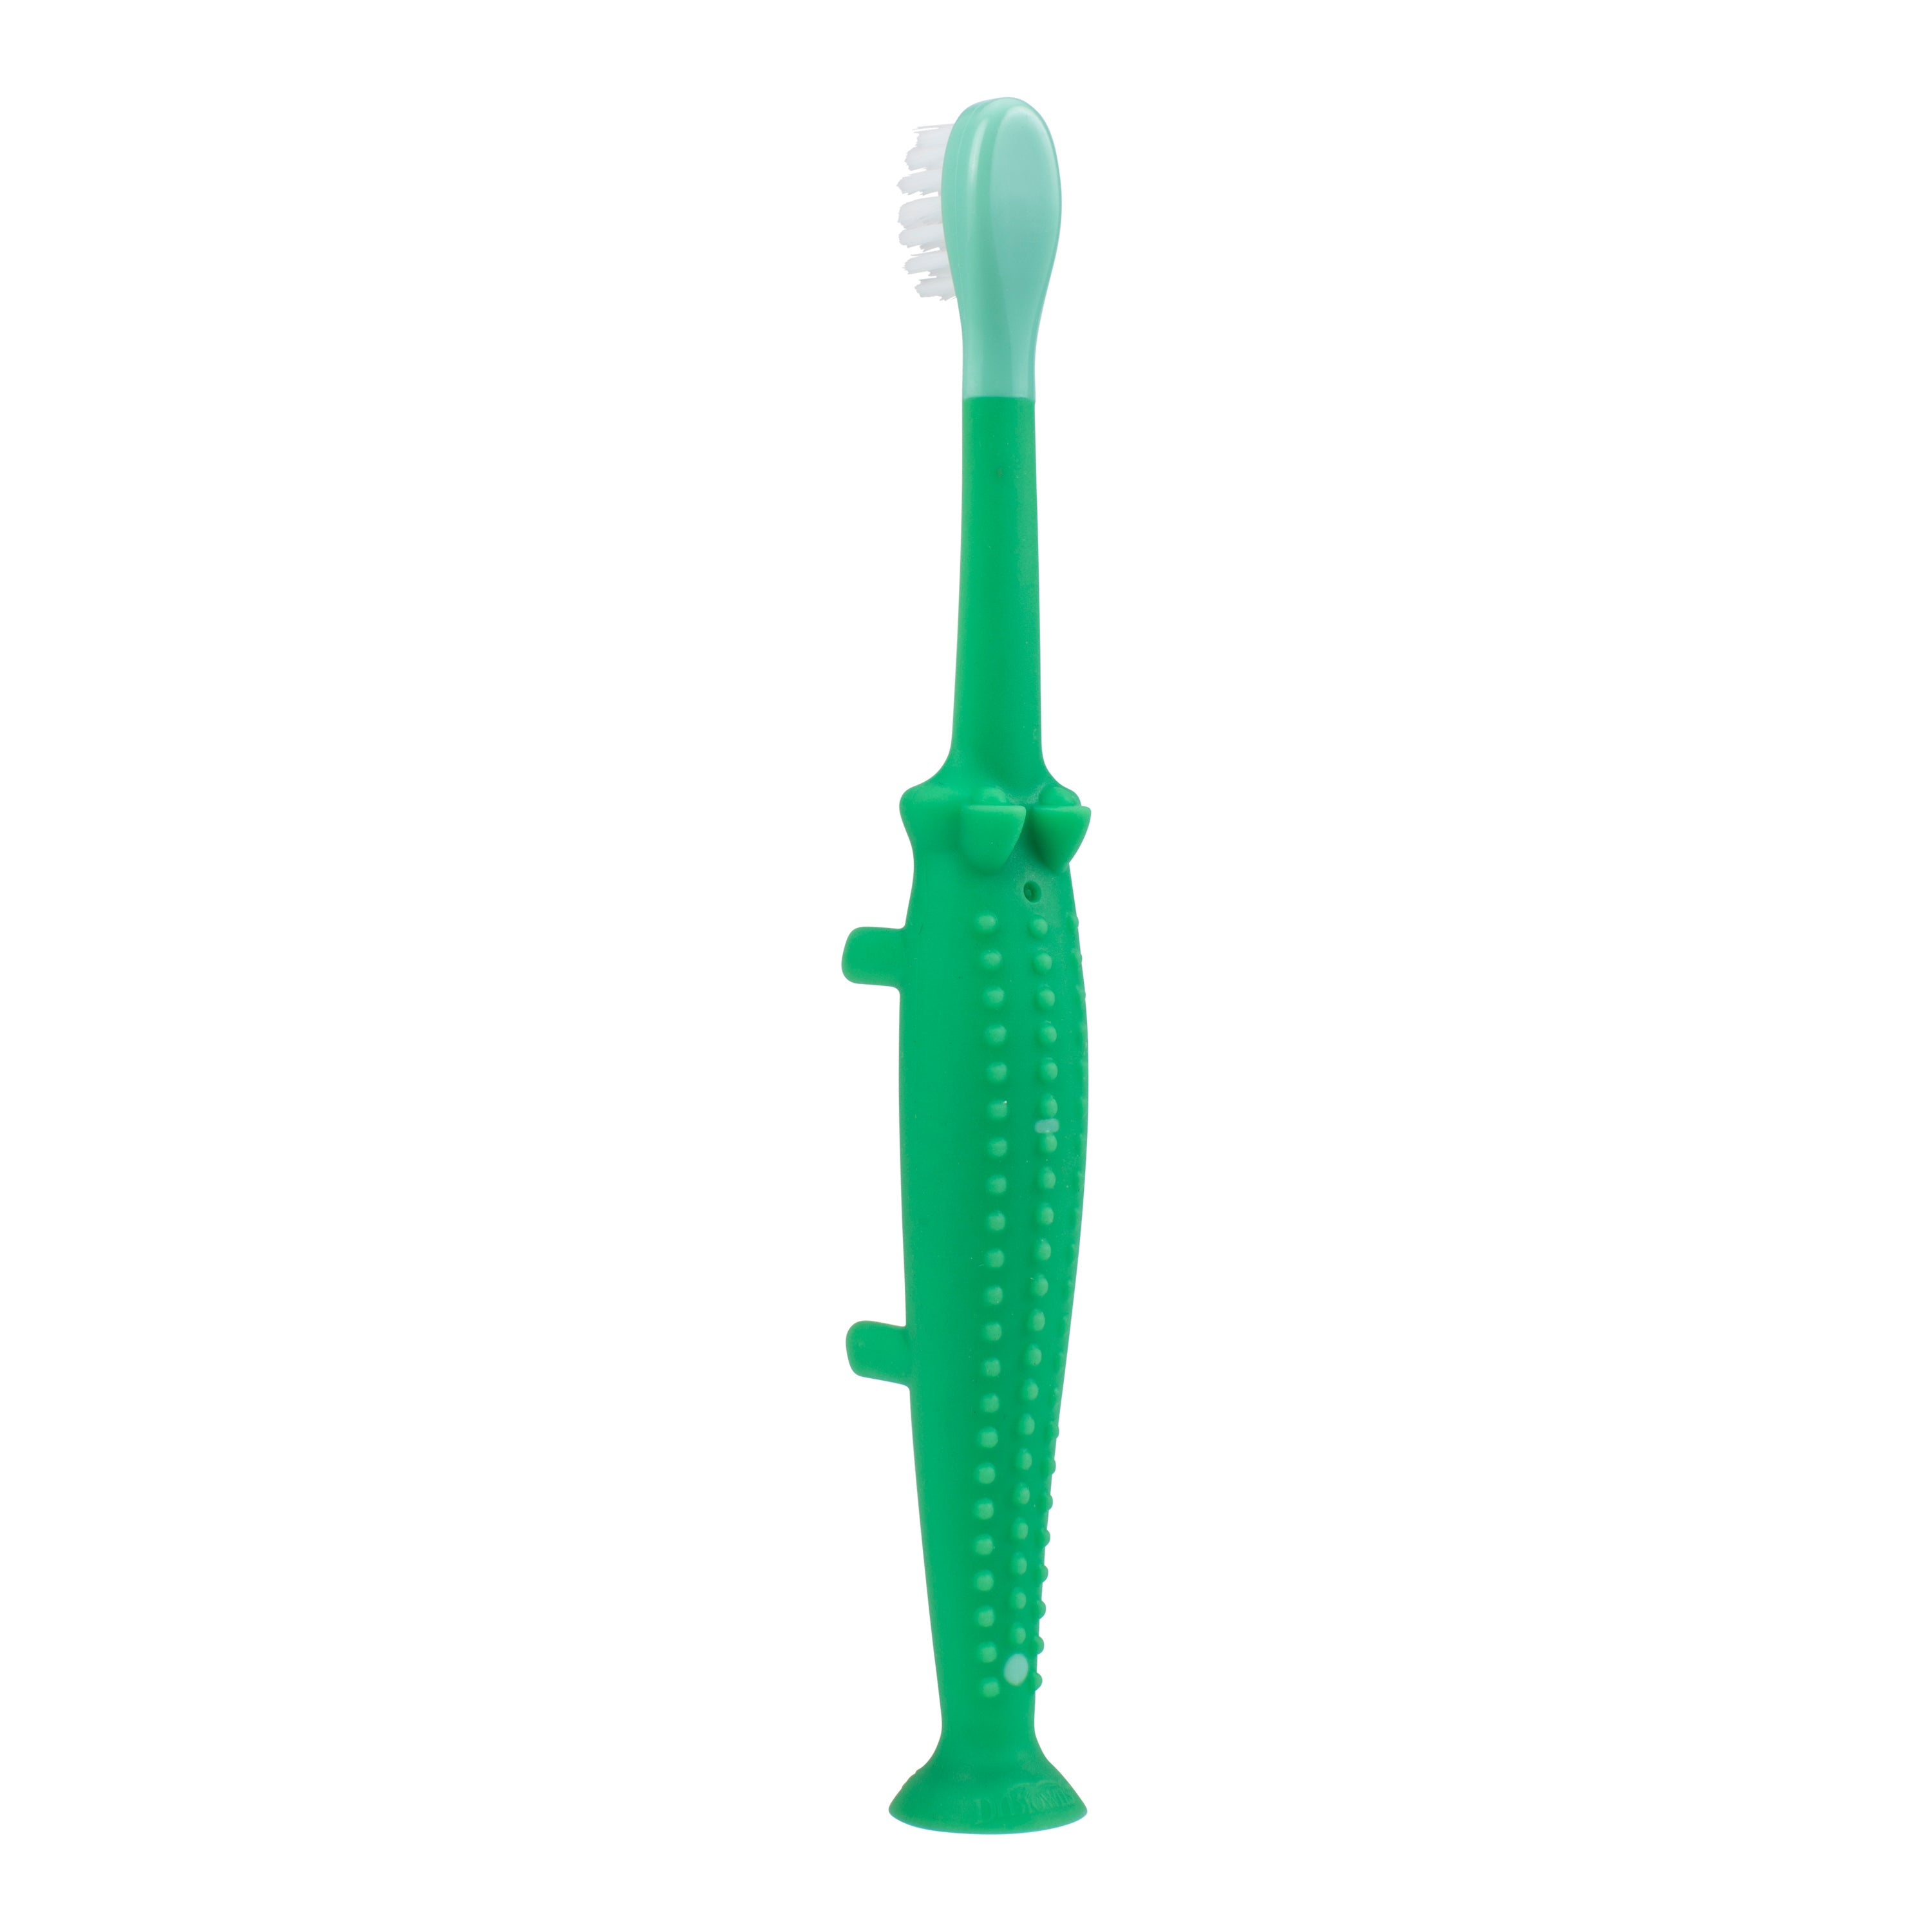 Dr. Brown's Infant-to-Toddler Toothbrush